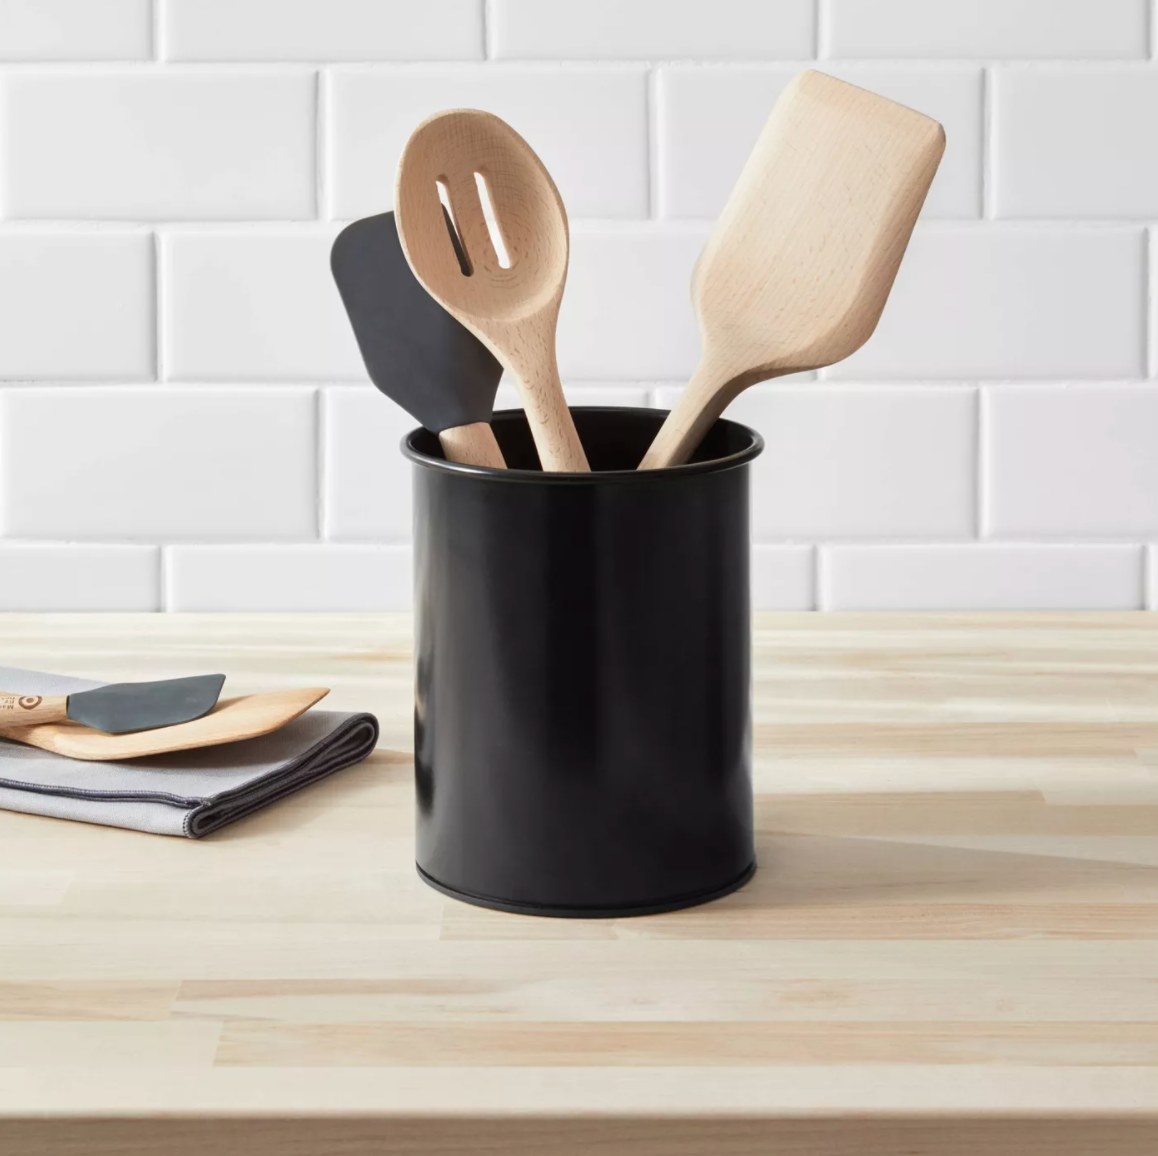 The stainless steel storage container in black holding a rubber spatula, slotted spoon, and wooden spatula